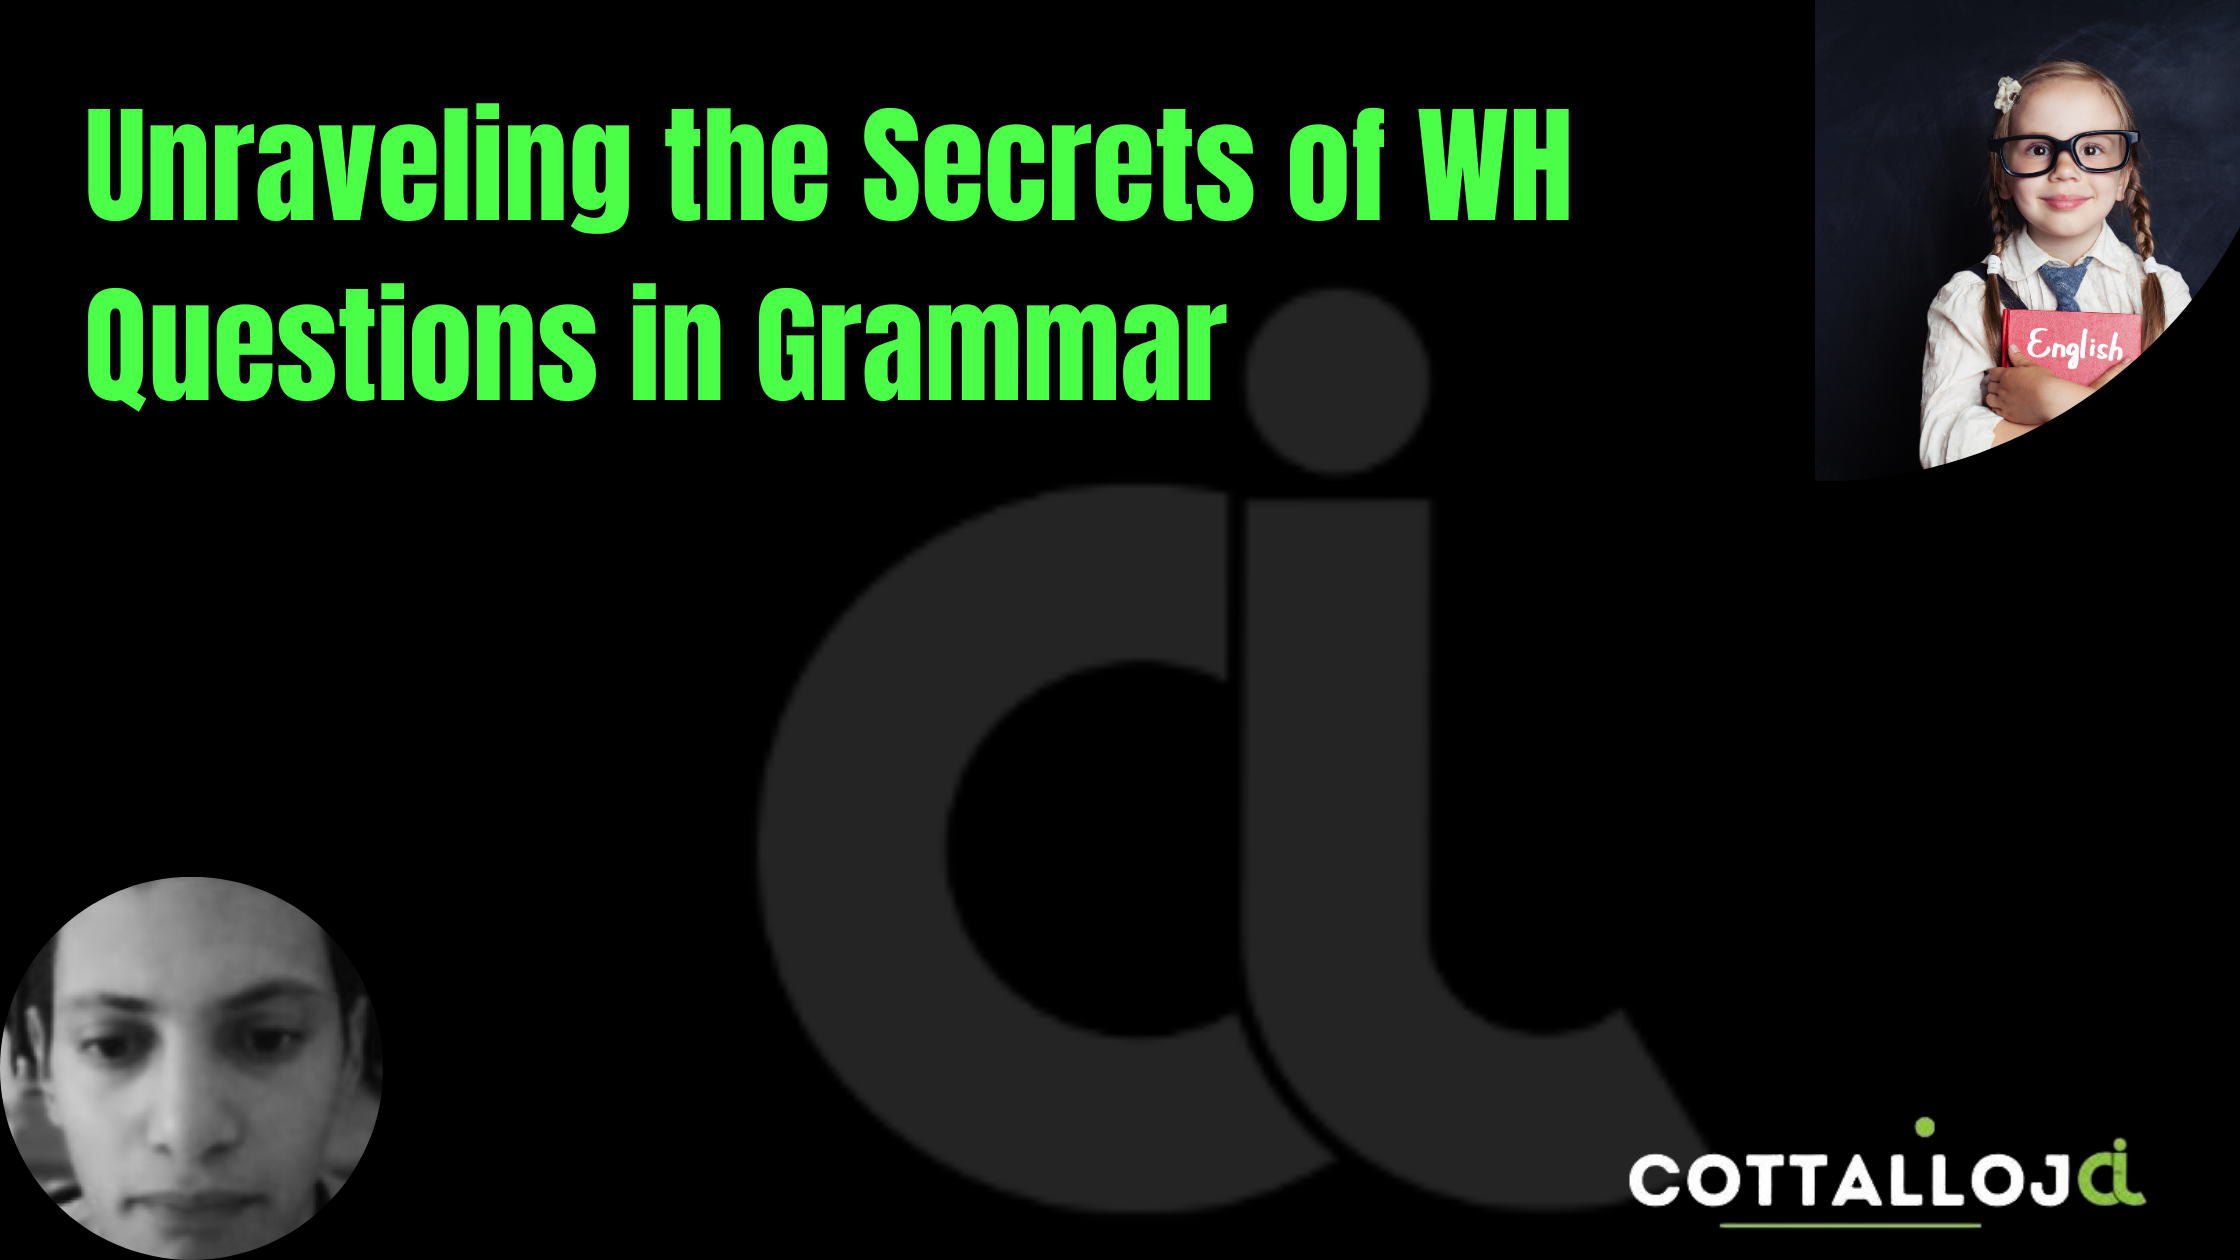 Unraveling the Secrets of WH Questions in Grammar